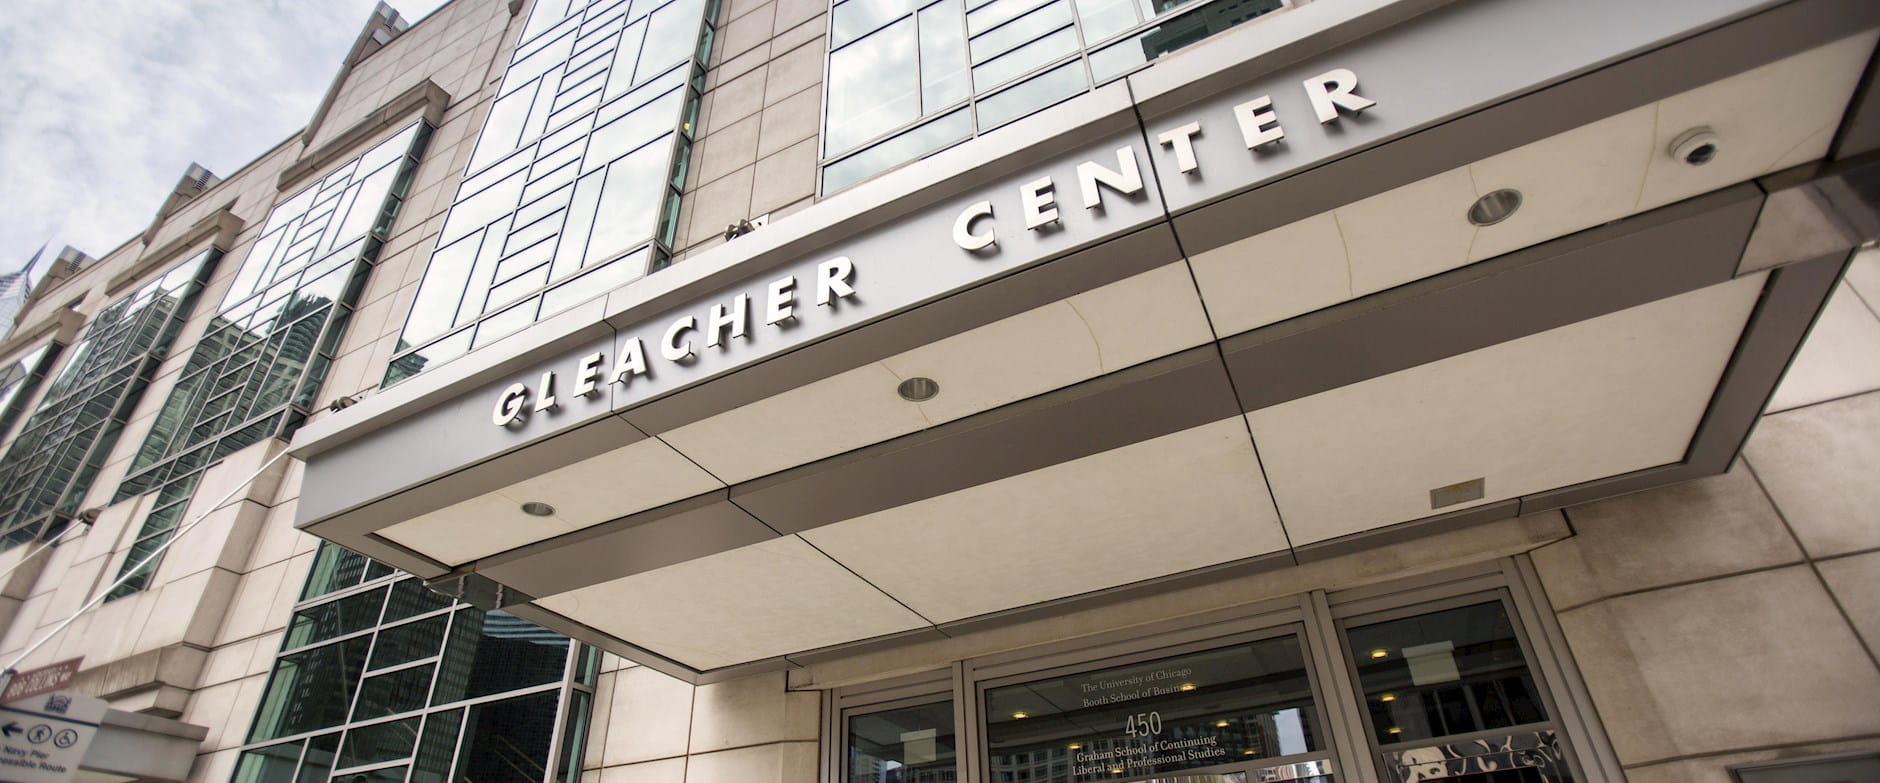 The Gleacher Center sign on the awning above the entrance to the building